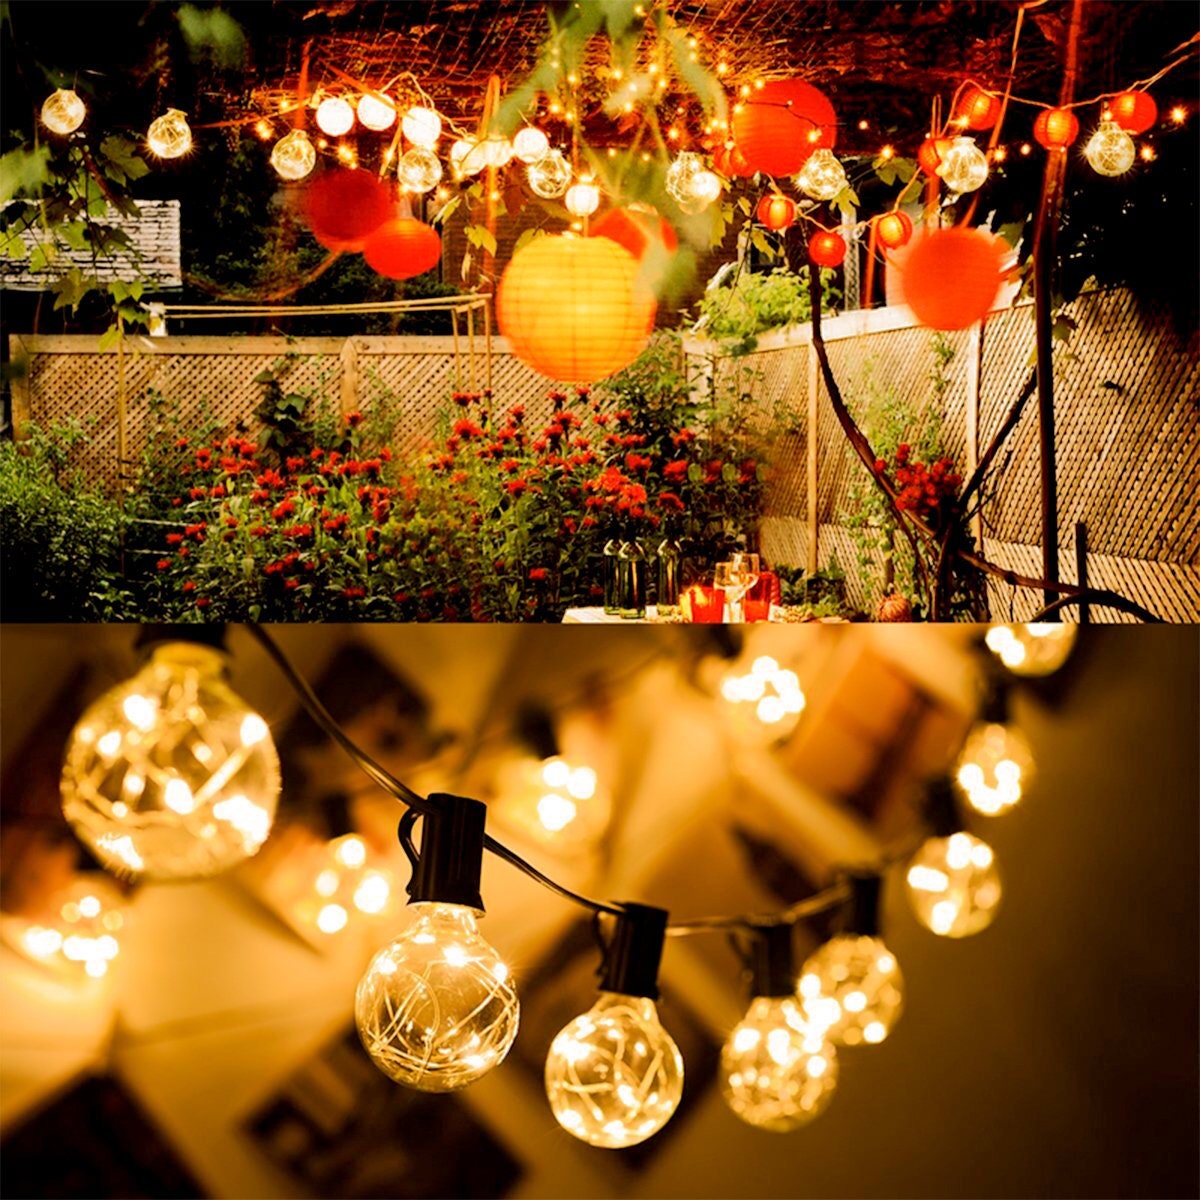 Outdoor LED String Light with G40 Fairy Bulbs for Patio Garden Yard Pool Party Wedding Lawn Porch Gazebo Gift